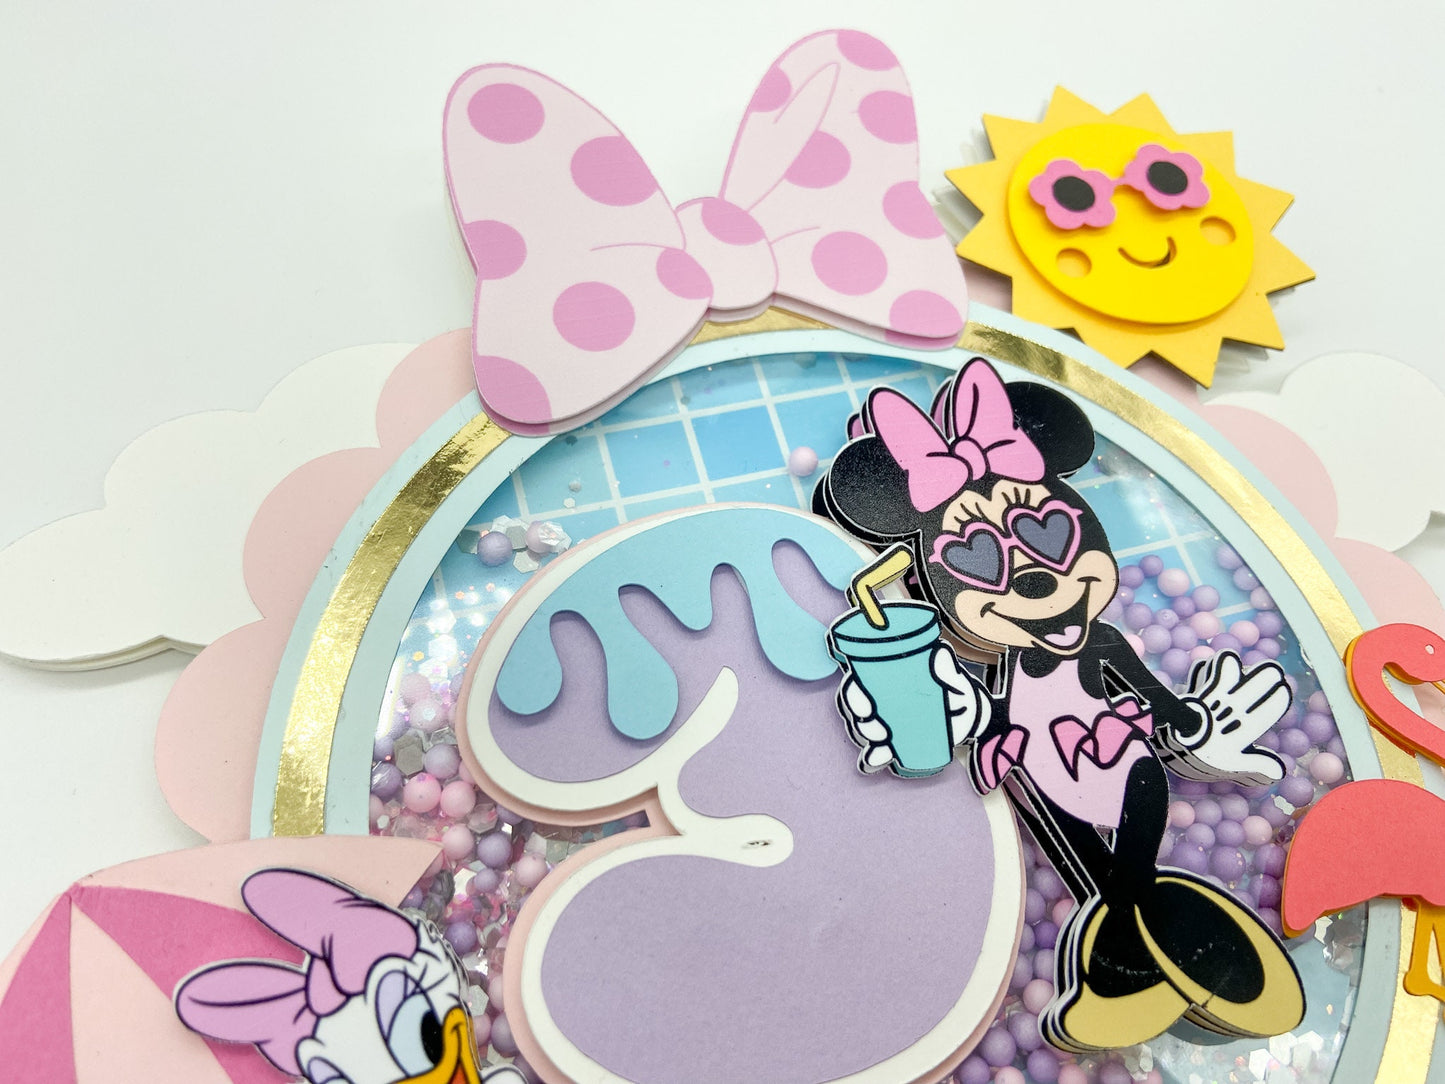 Minnie Mouse pool party | Minnie Mouse birthday | Minnie party | Minnie and daisy birthday | Shaker cake topper